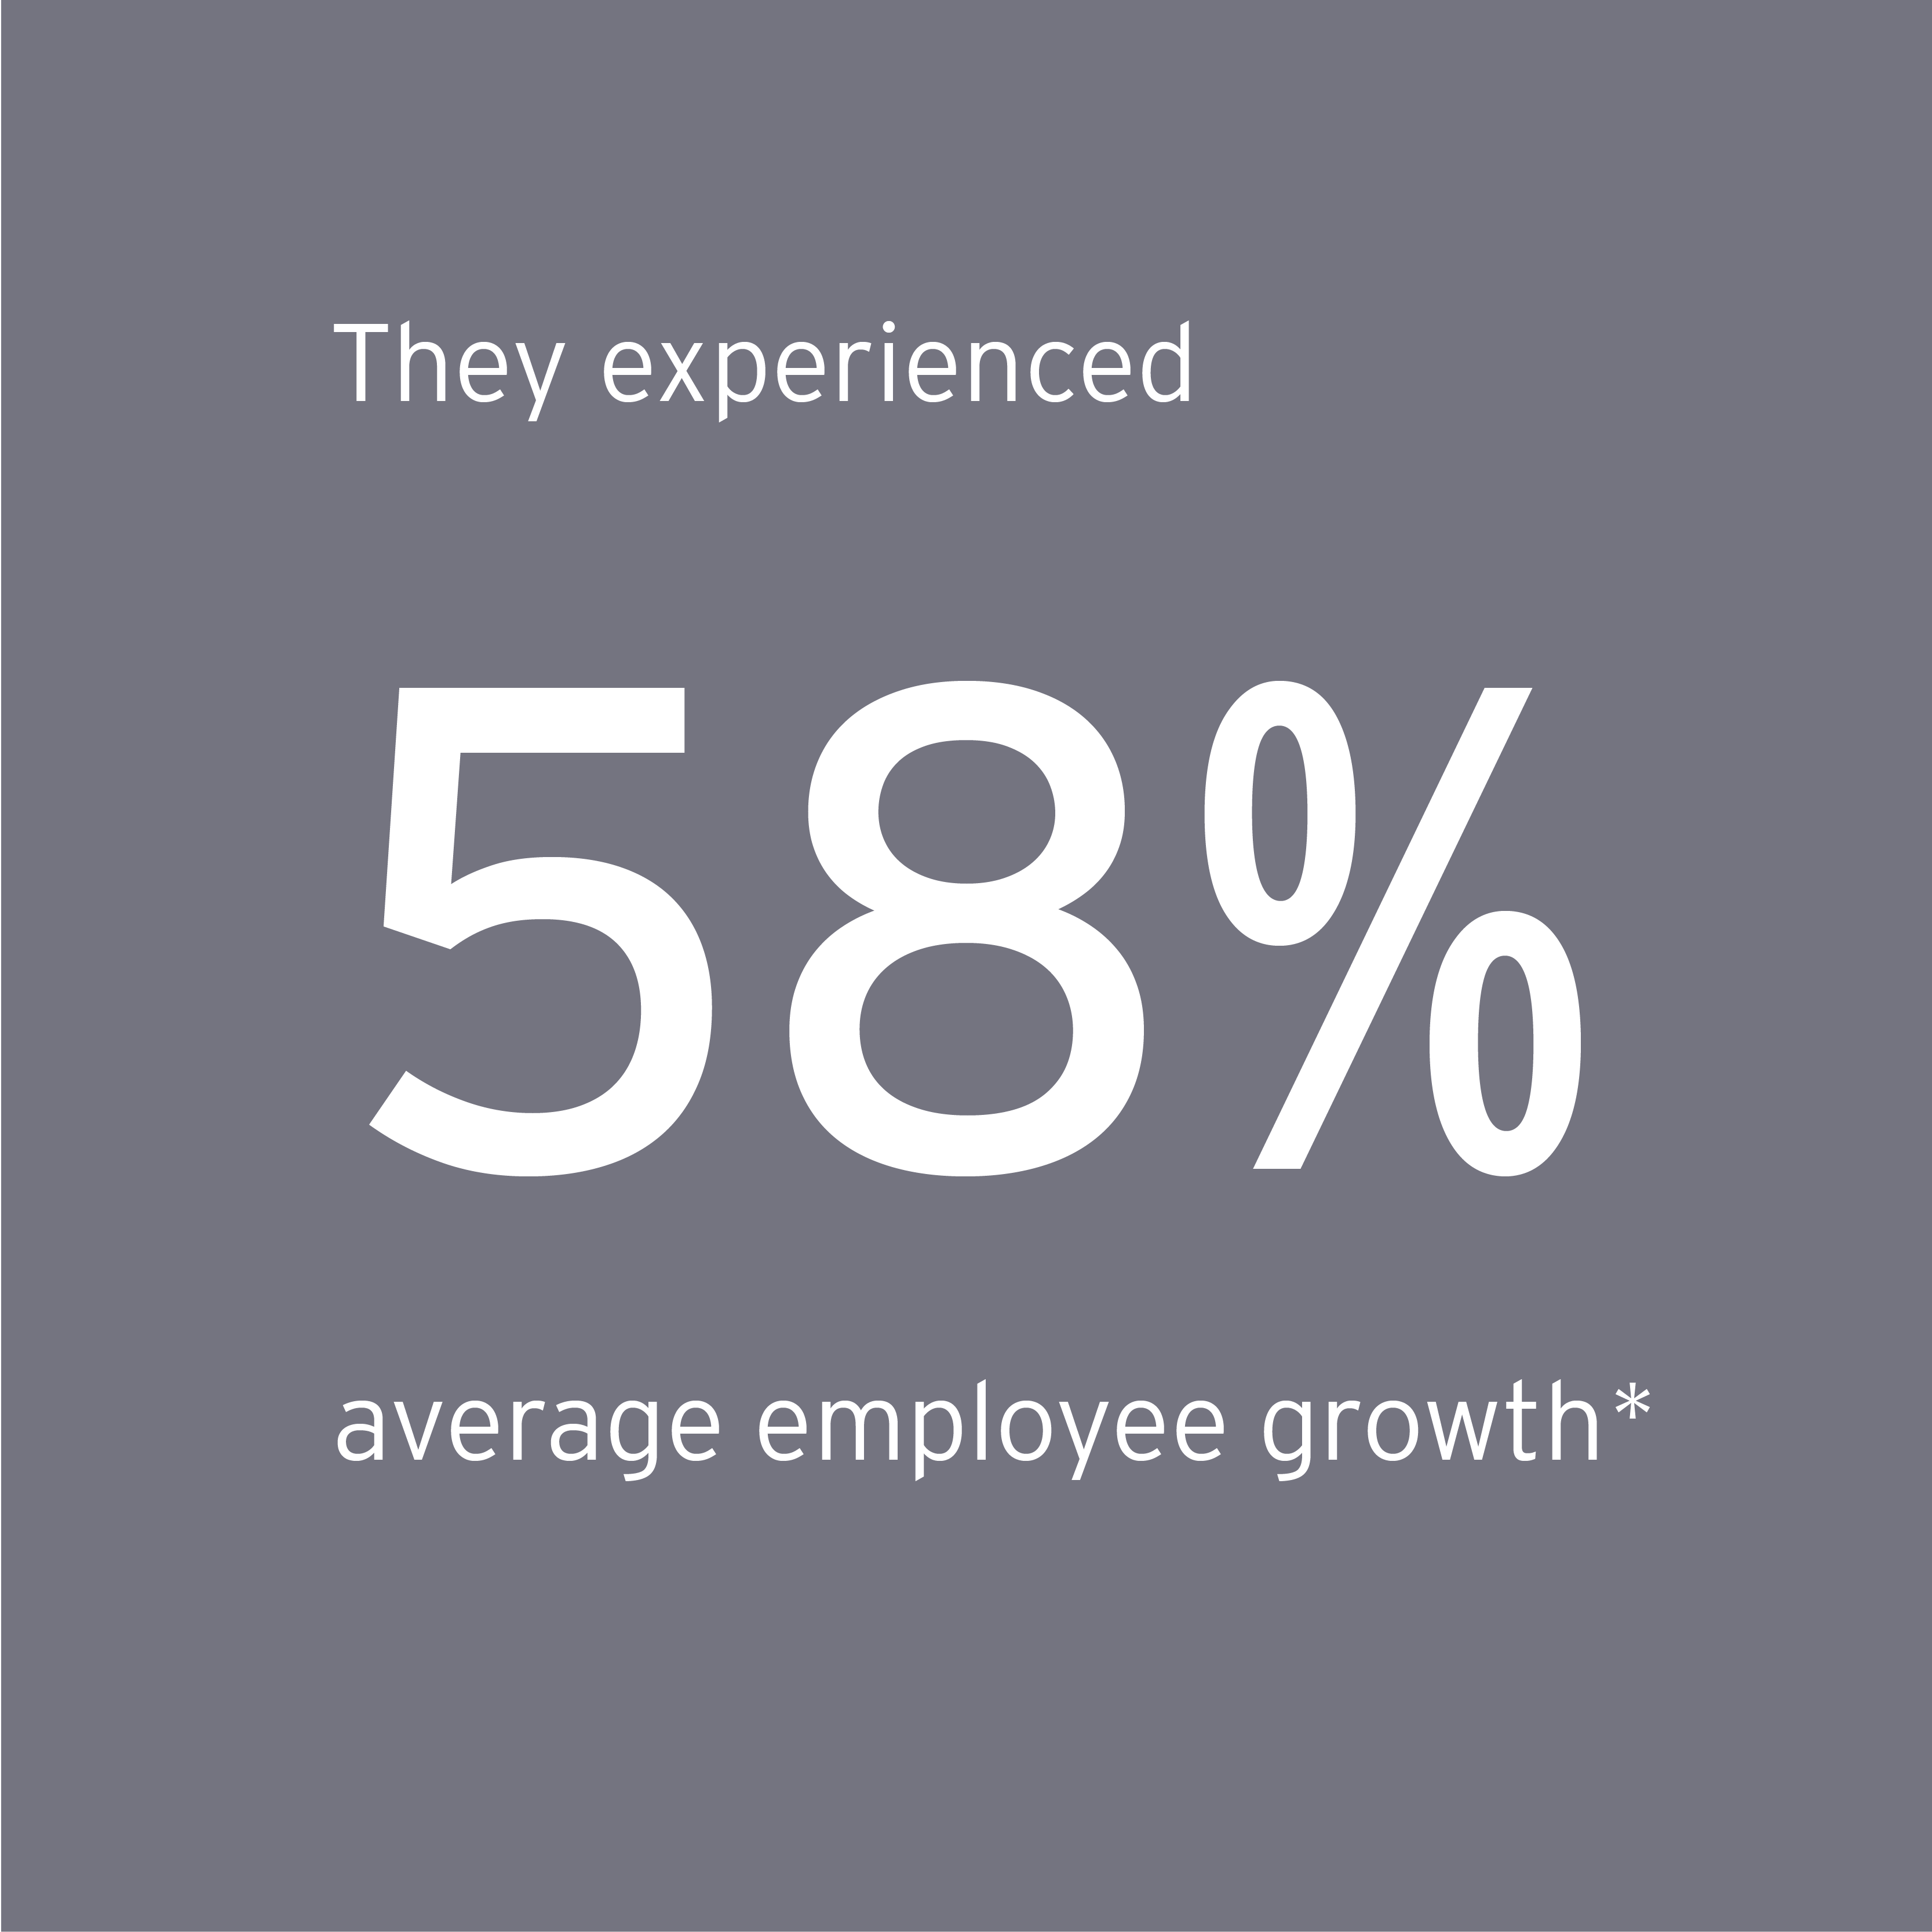 They experienced 58% average employee growth*